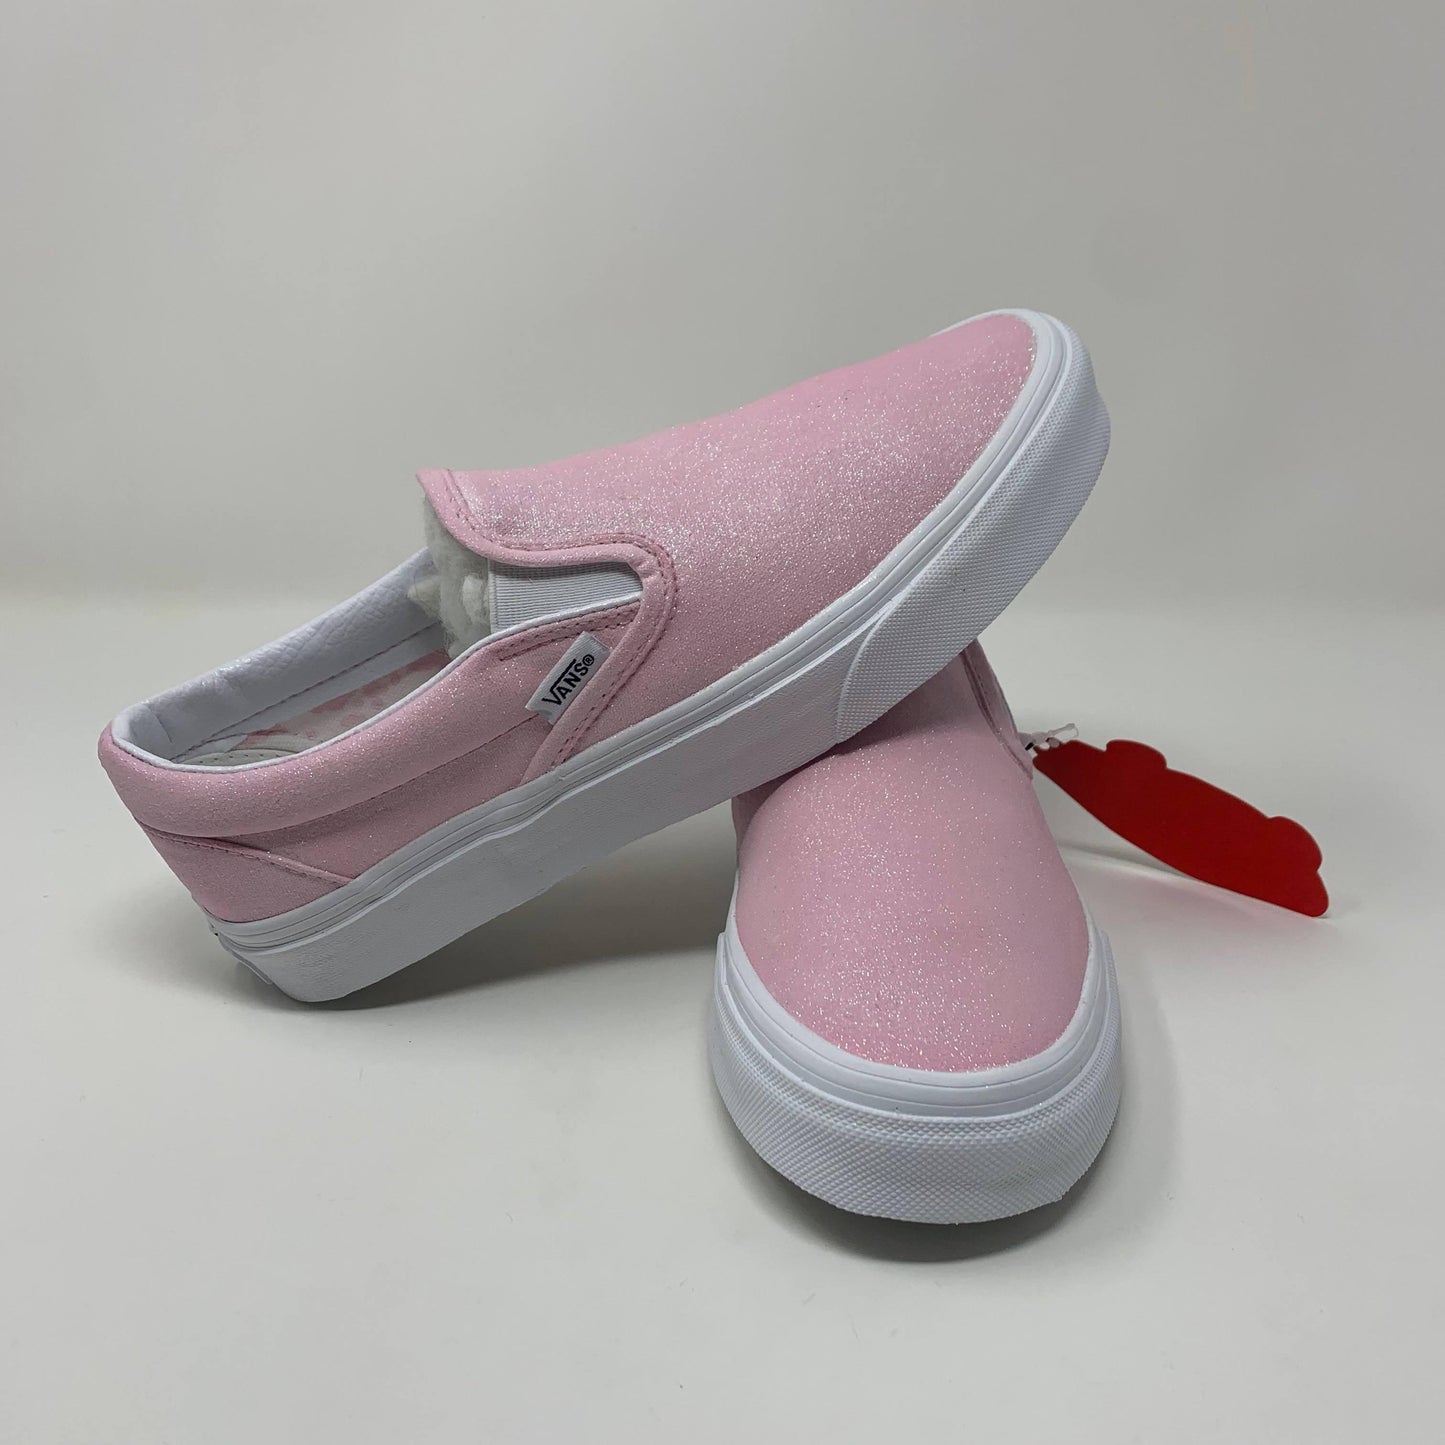 Light Pink Glitter Shoes - ButterMakesMeHappy